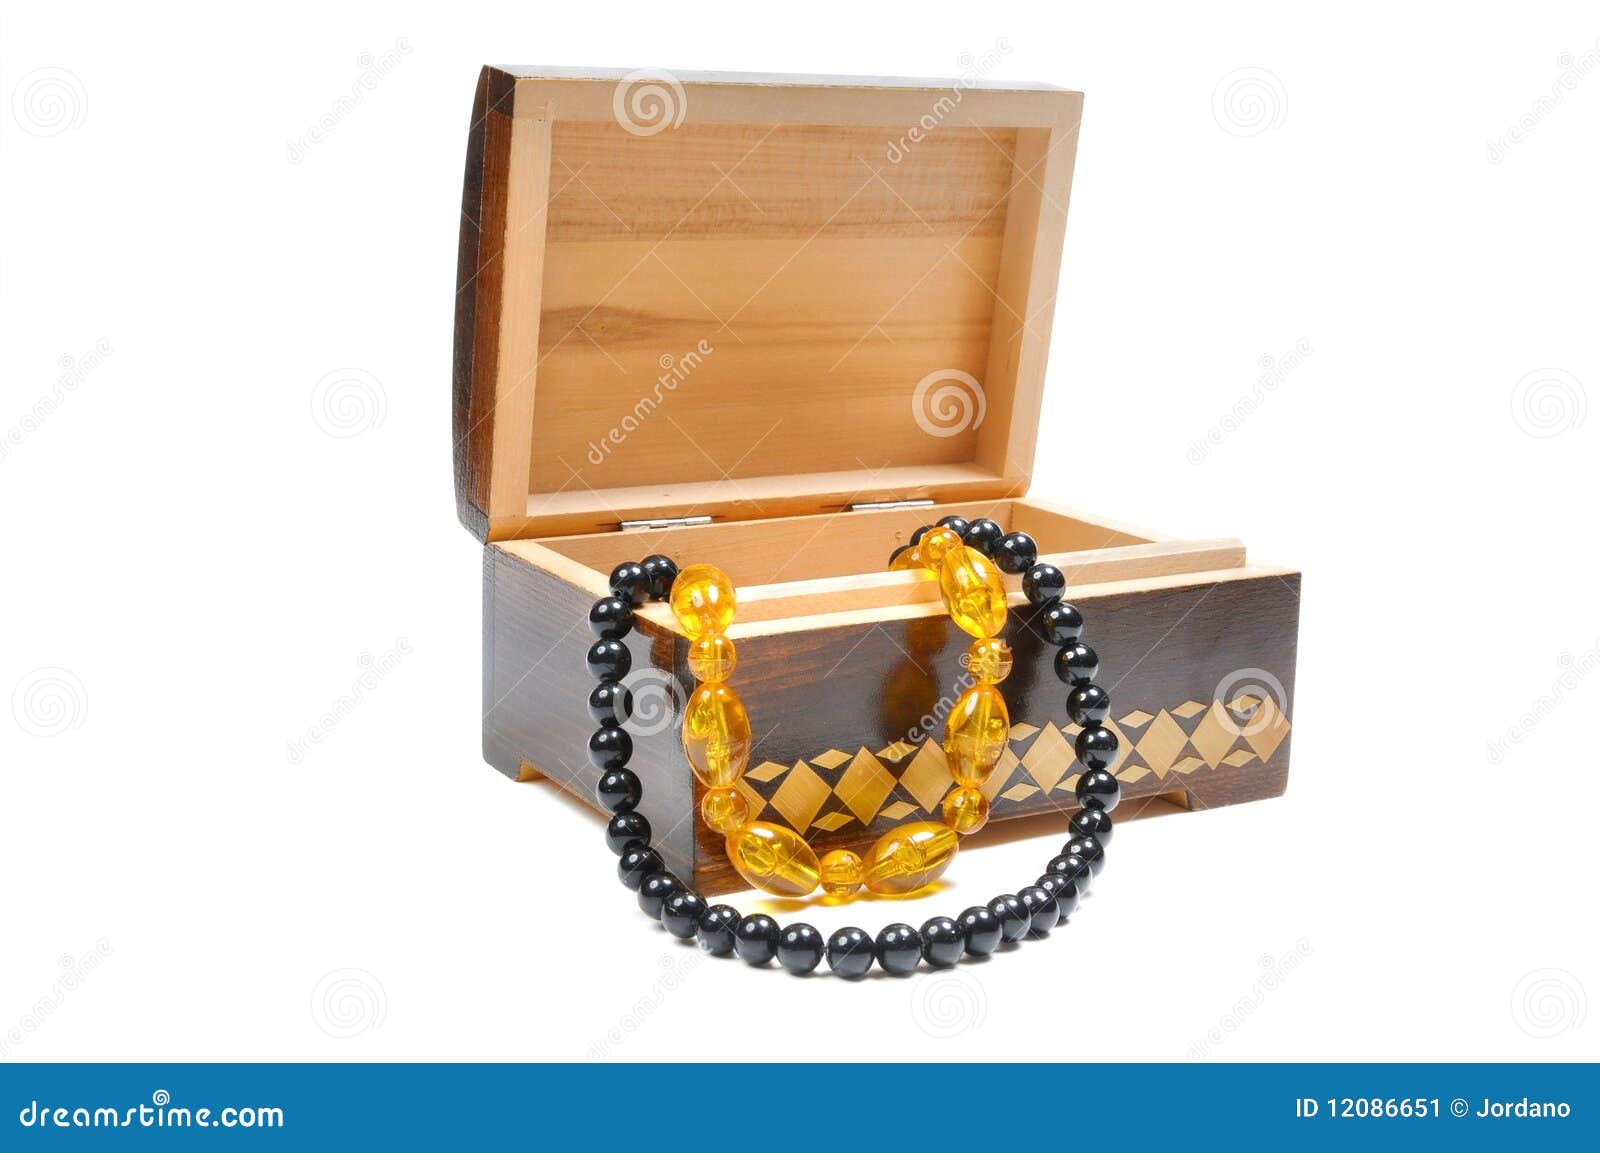 Wooden box with jewelry on a white background